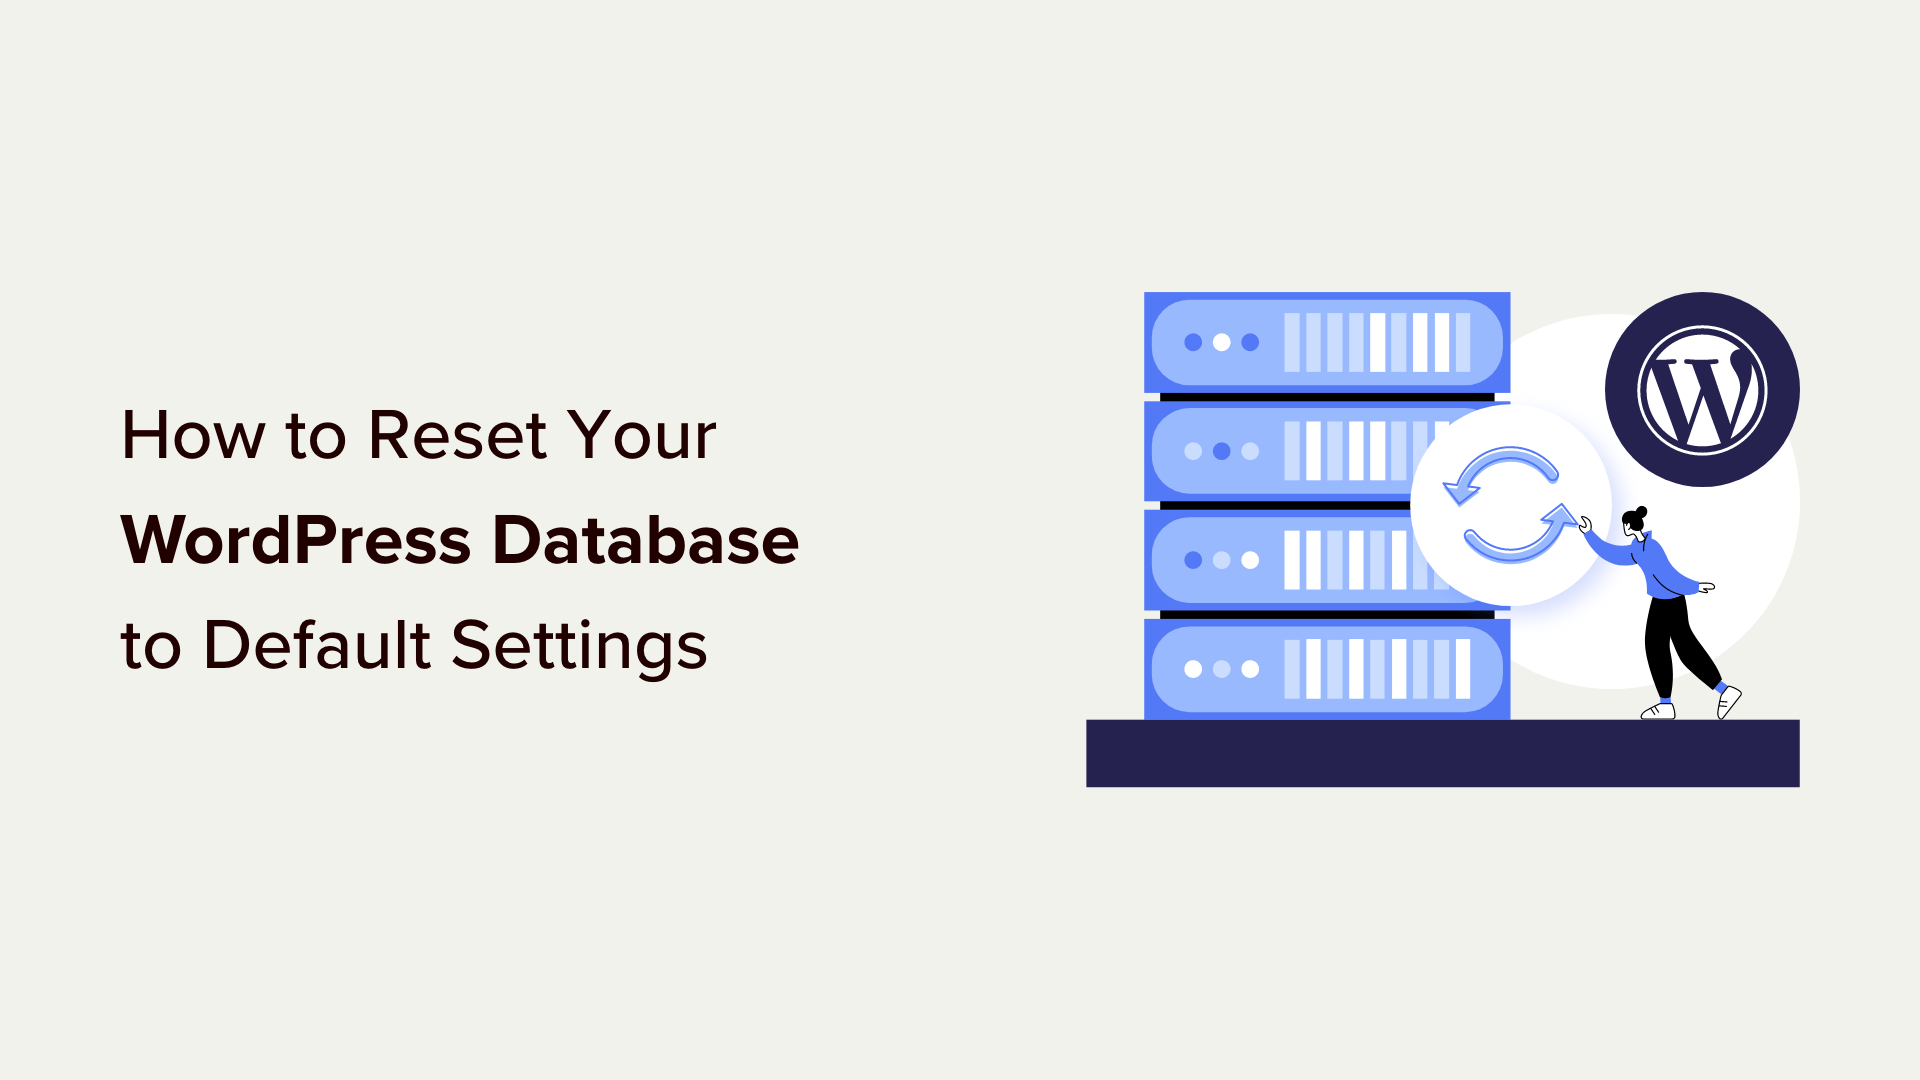 How to change the default theme for new databases?